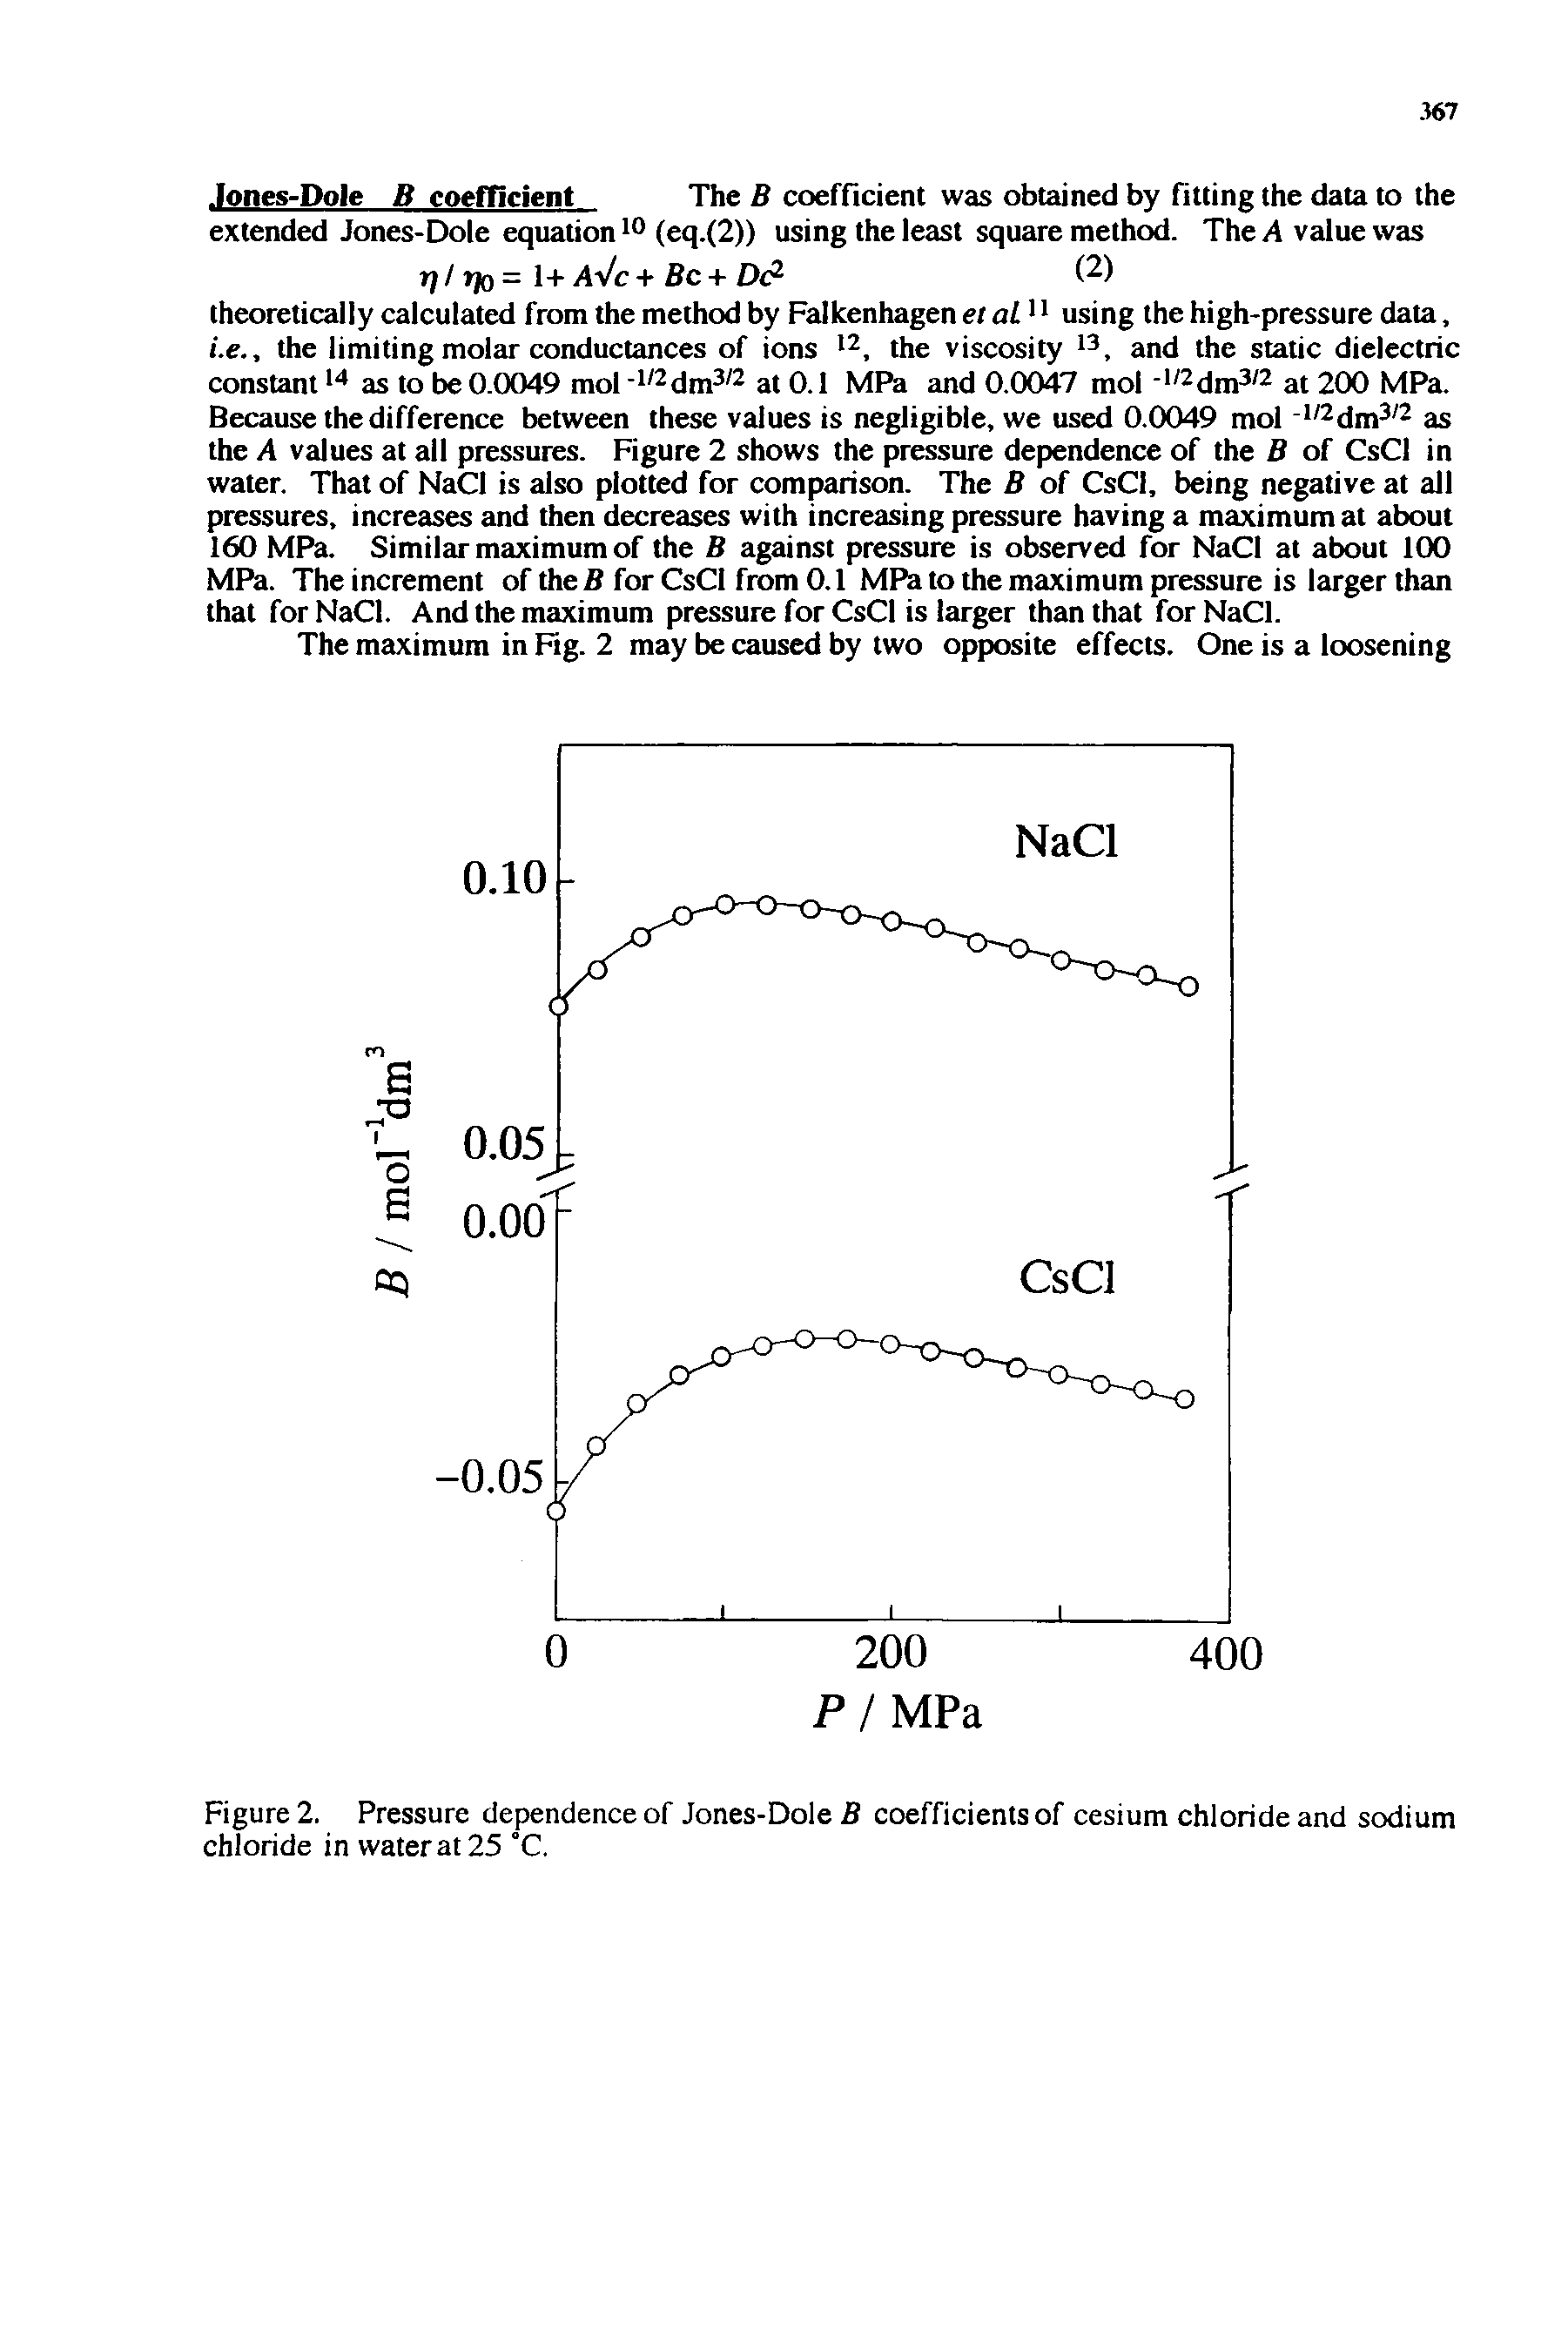 Figure 2. Pressure dependence of Jones-Dole B coefficients of cesium chloride and sodium chloride in water at 25 °C,...